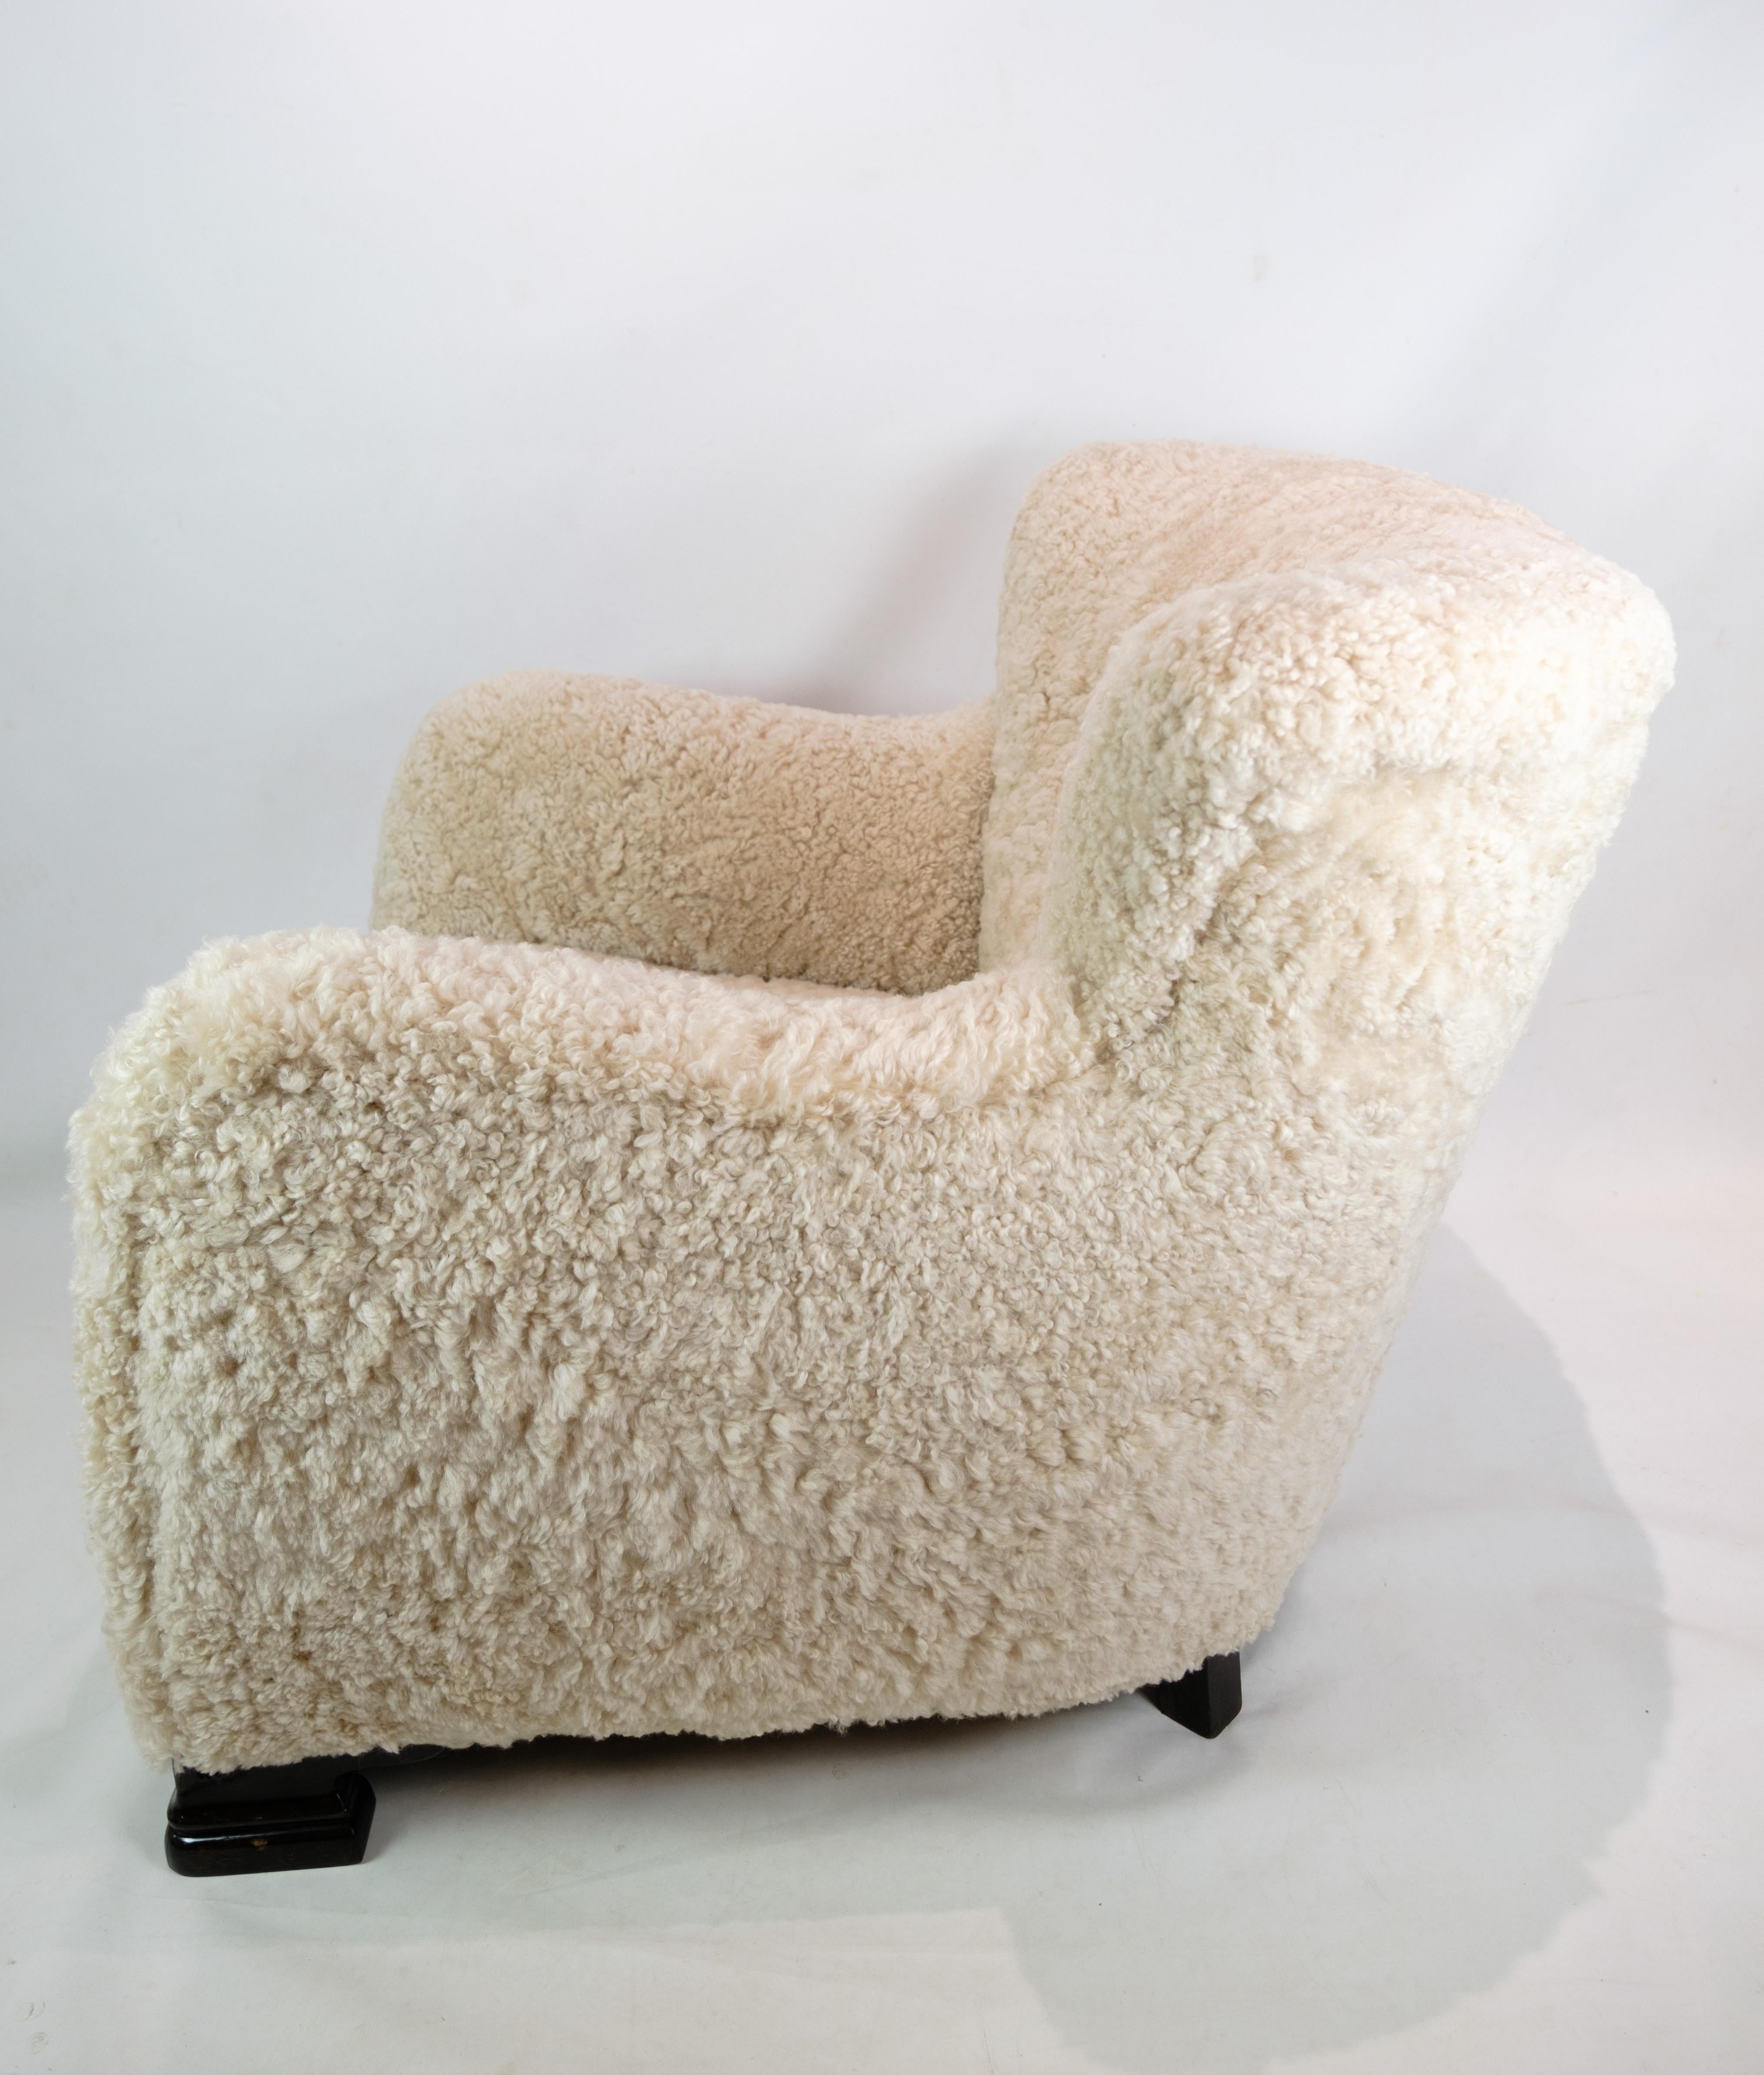 Easy Chair of a Danish Designer in Sheepskin from the 1940s For Sale 2